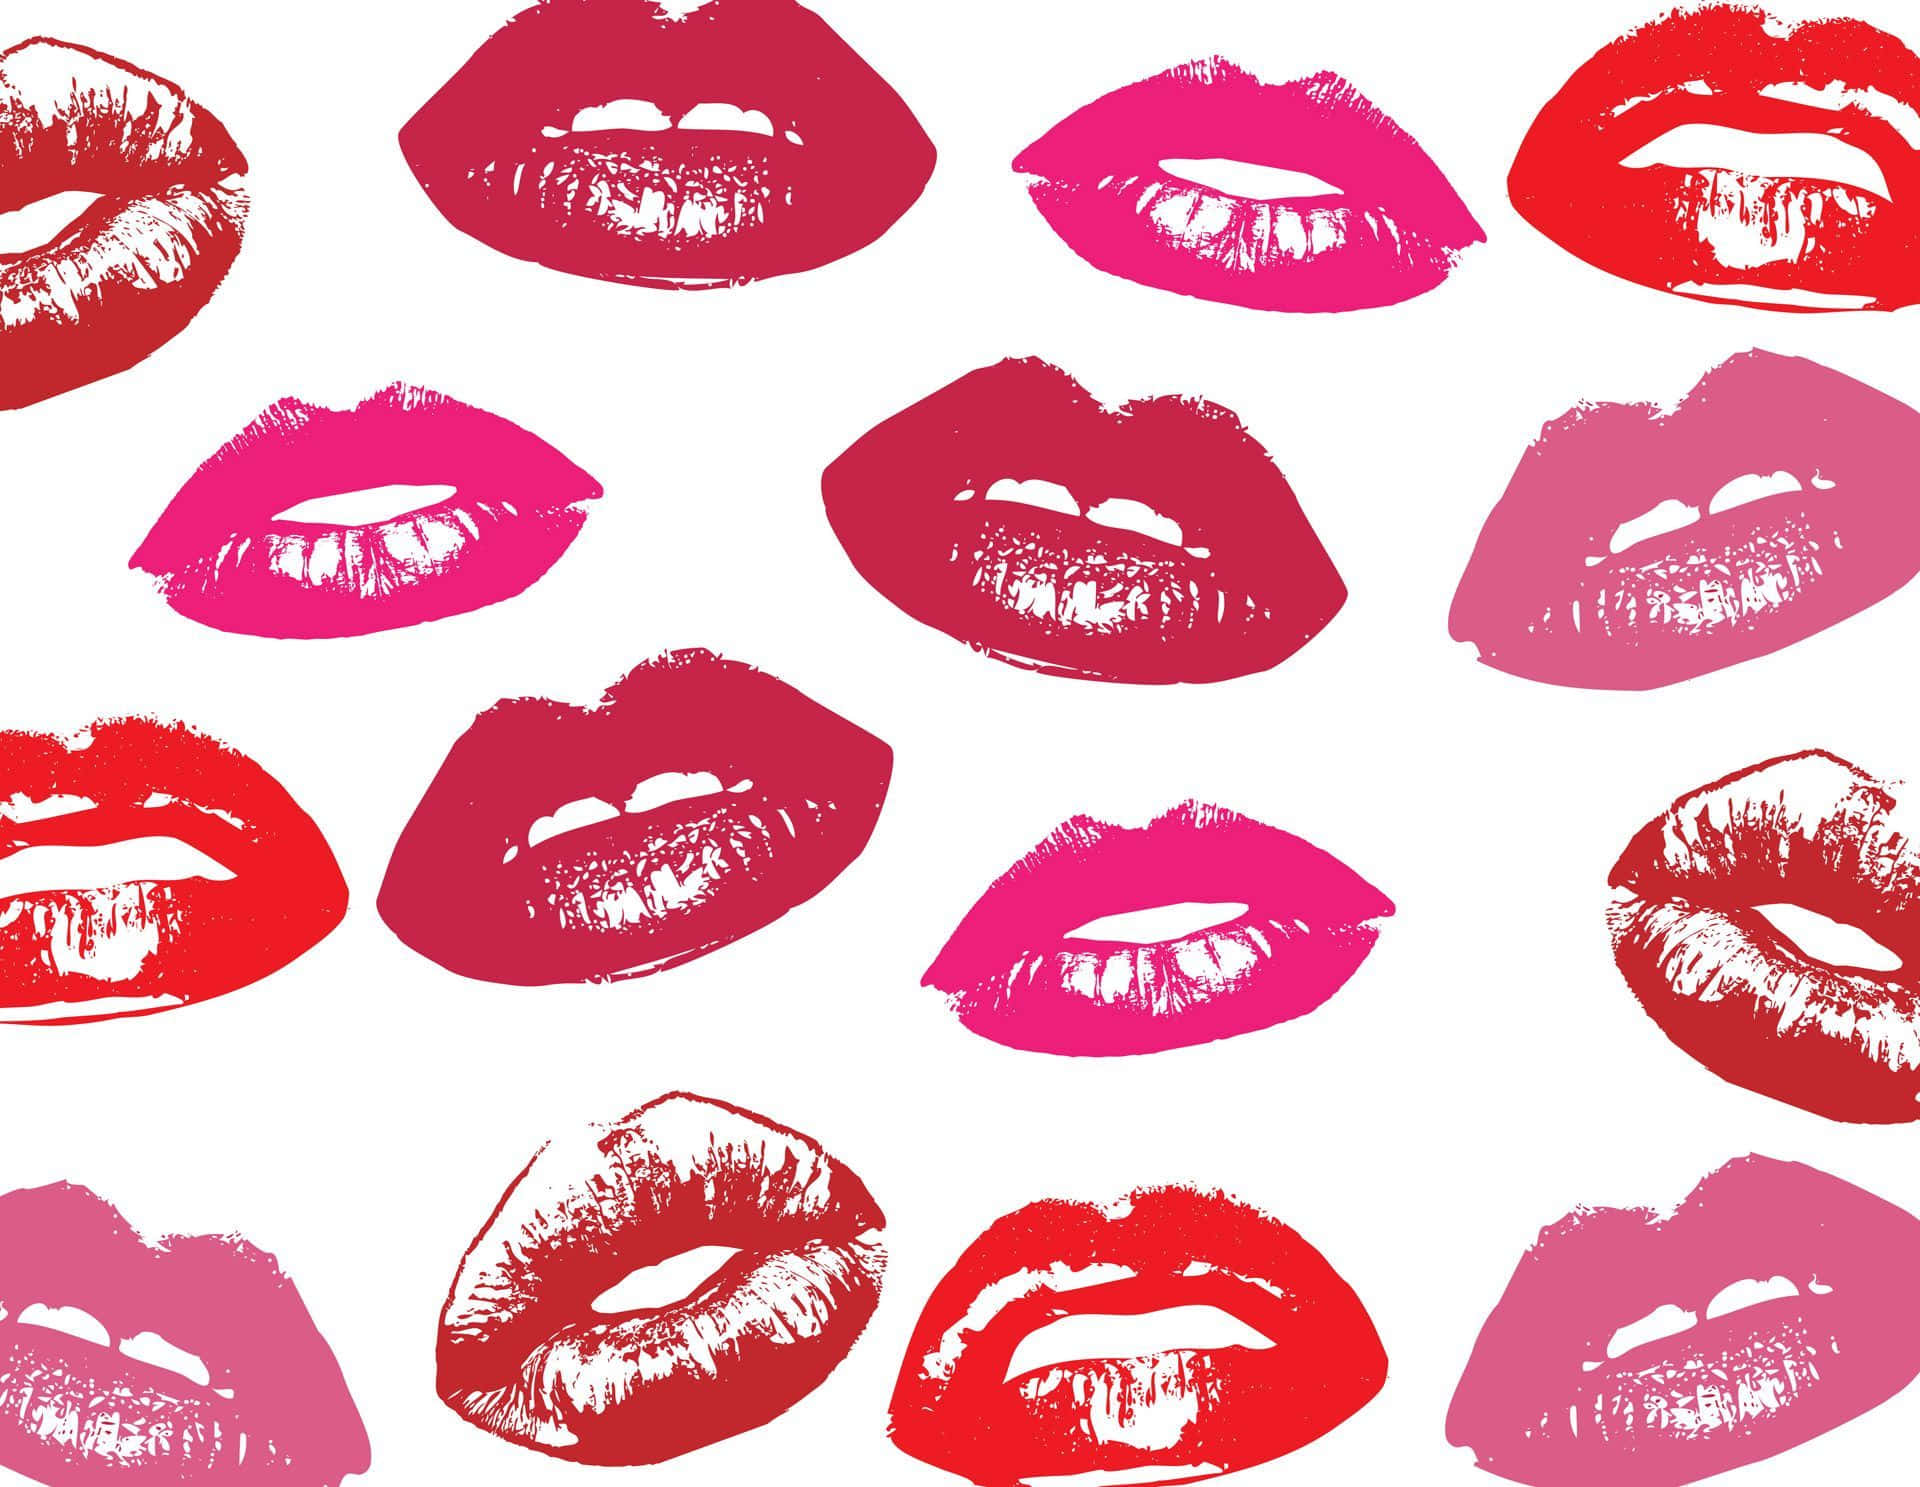 A Pattern Of Lips With Red And Pink Colors